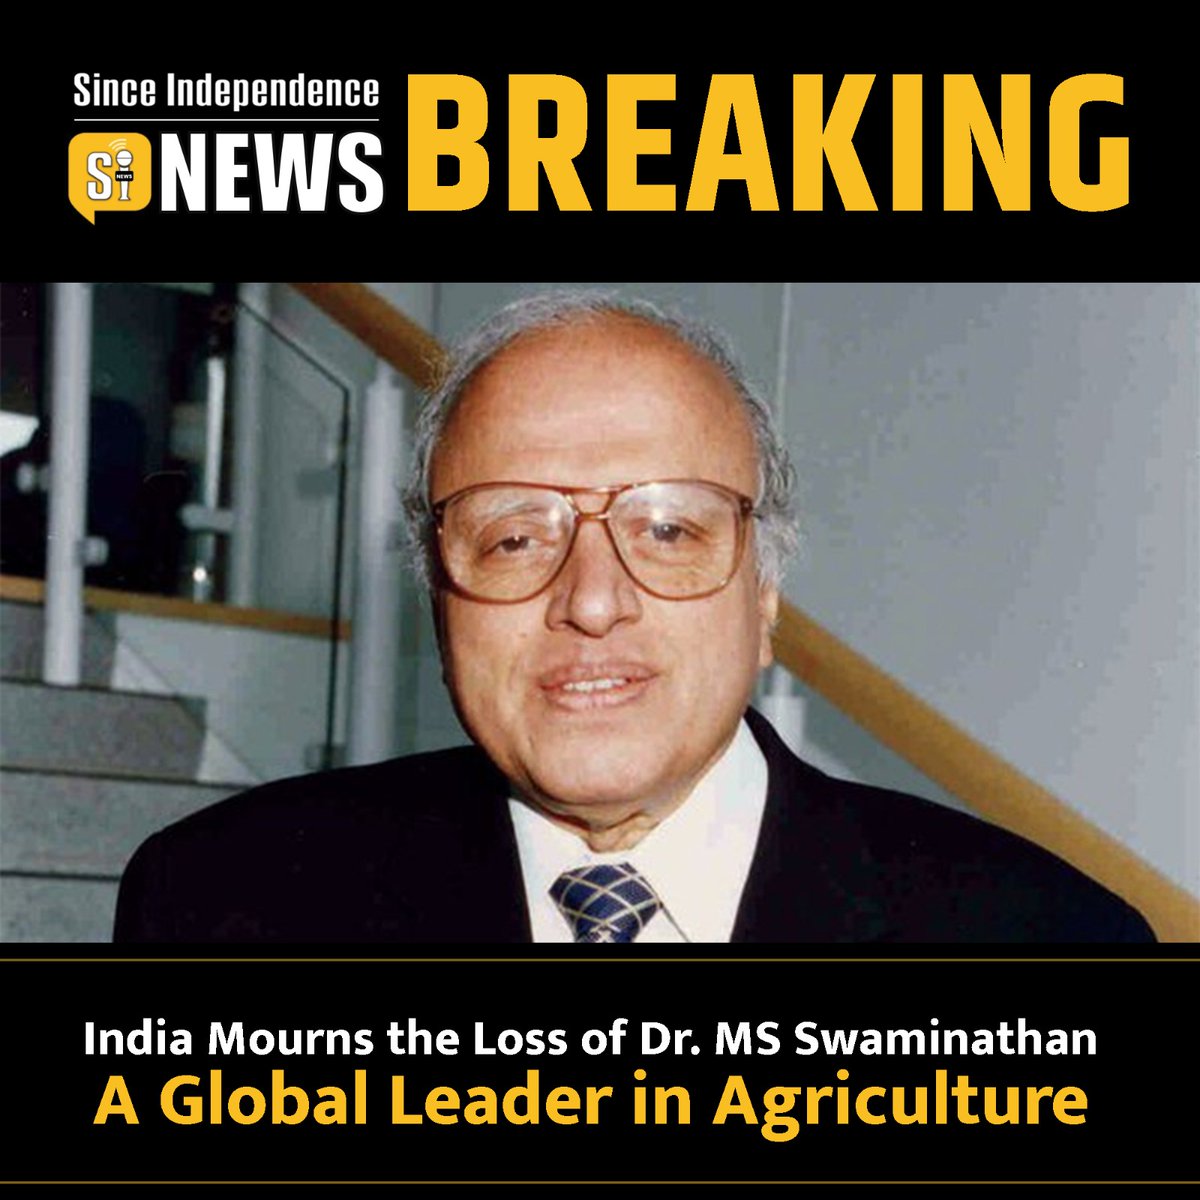 India Mourns the Loss of Dr. MS Swaminathan, a Global Leader in Agriculture ------  BREAKING

#BreakingNews #India #Mourns #IndiaMourns #Loss #DrMSSwaminathan #GlobalLeader #Agriculture #BadiKhabar #SpecialReport #BreakingNews #SinceIndependence